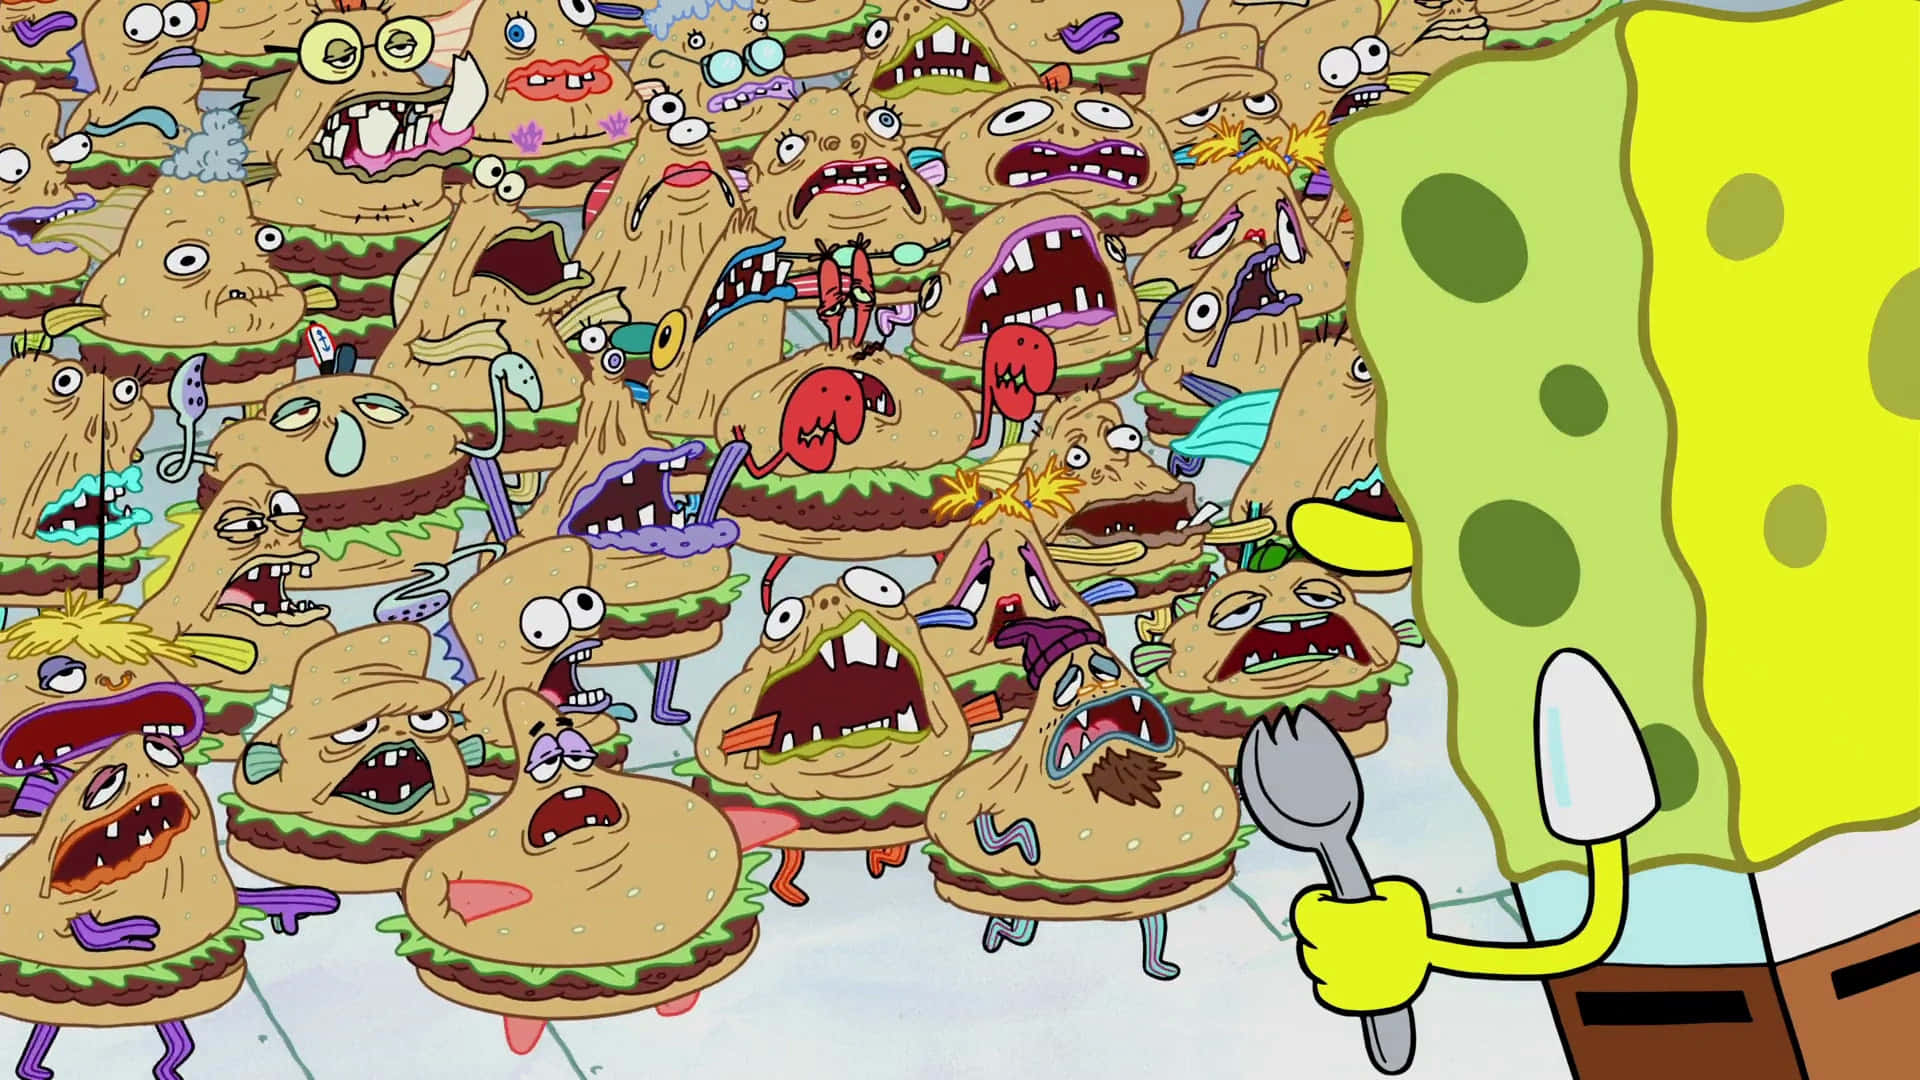 Delectable Krabby Patty from the world of SpongeBob SquarePants Wallpaper